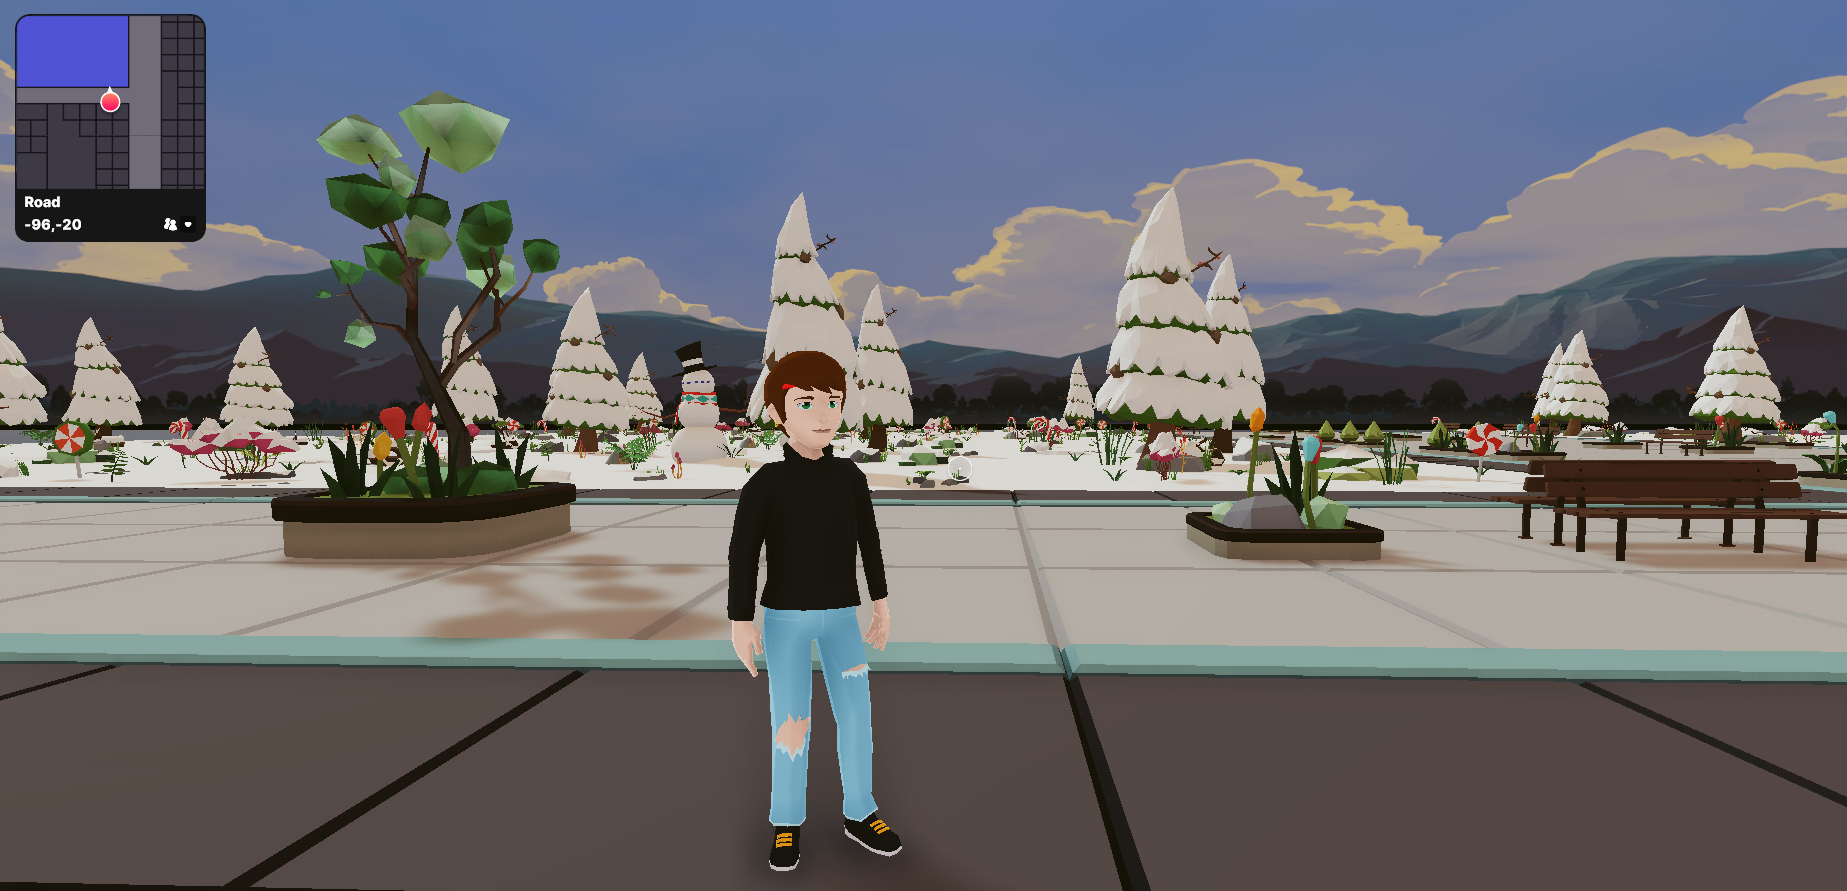 Roblox CEO says metaverse is still huge opportunity